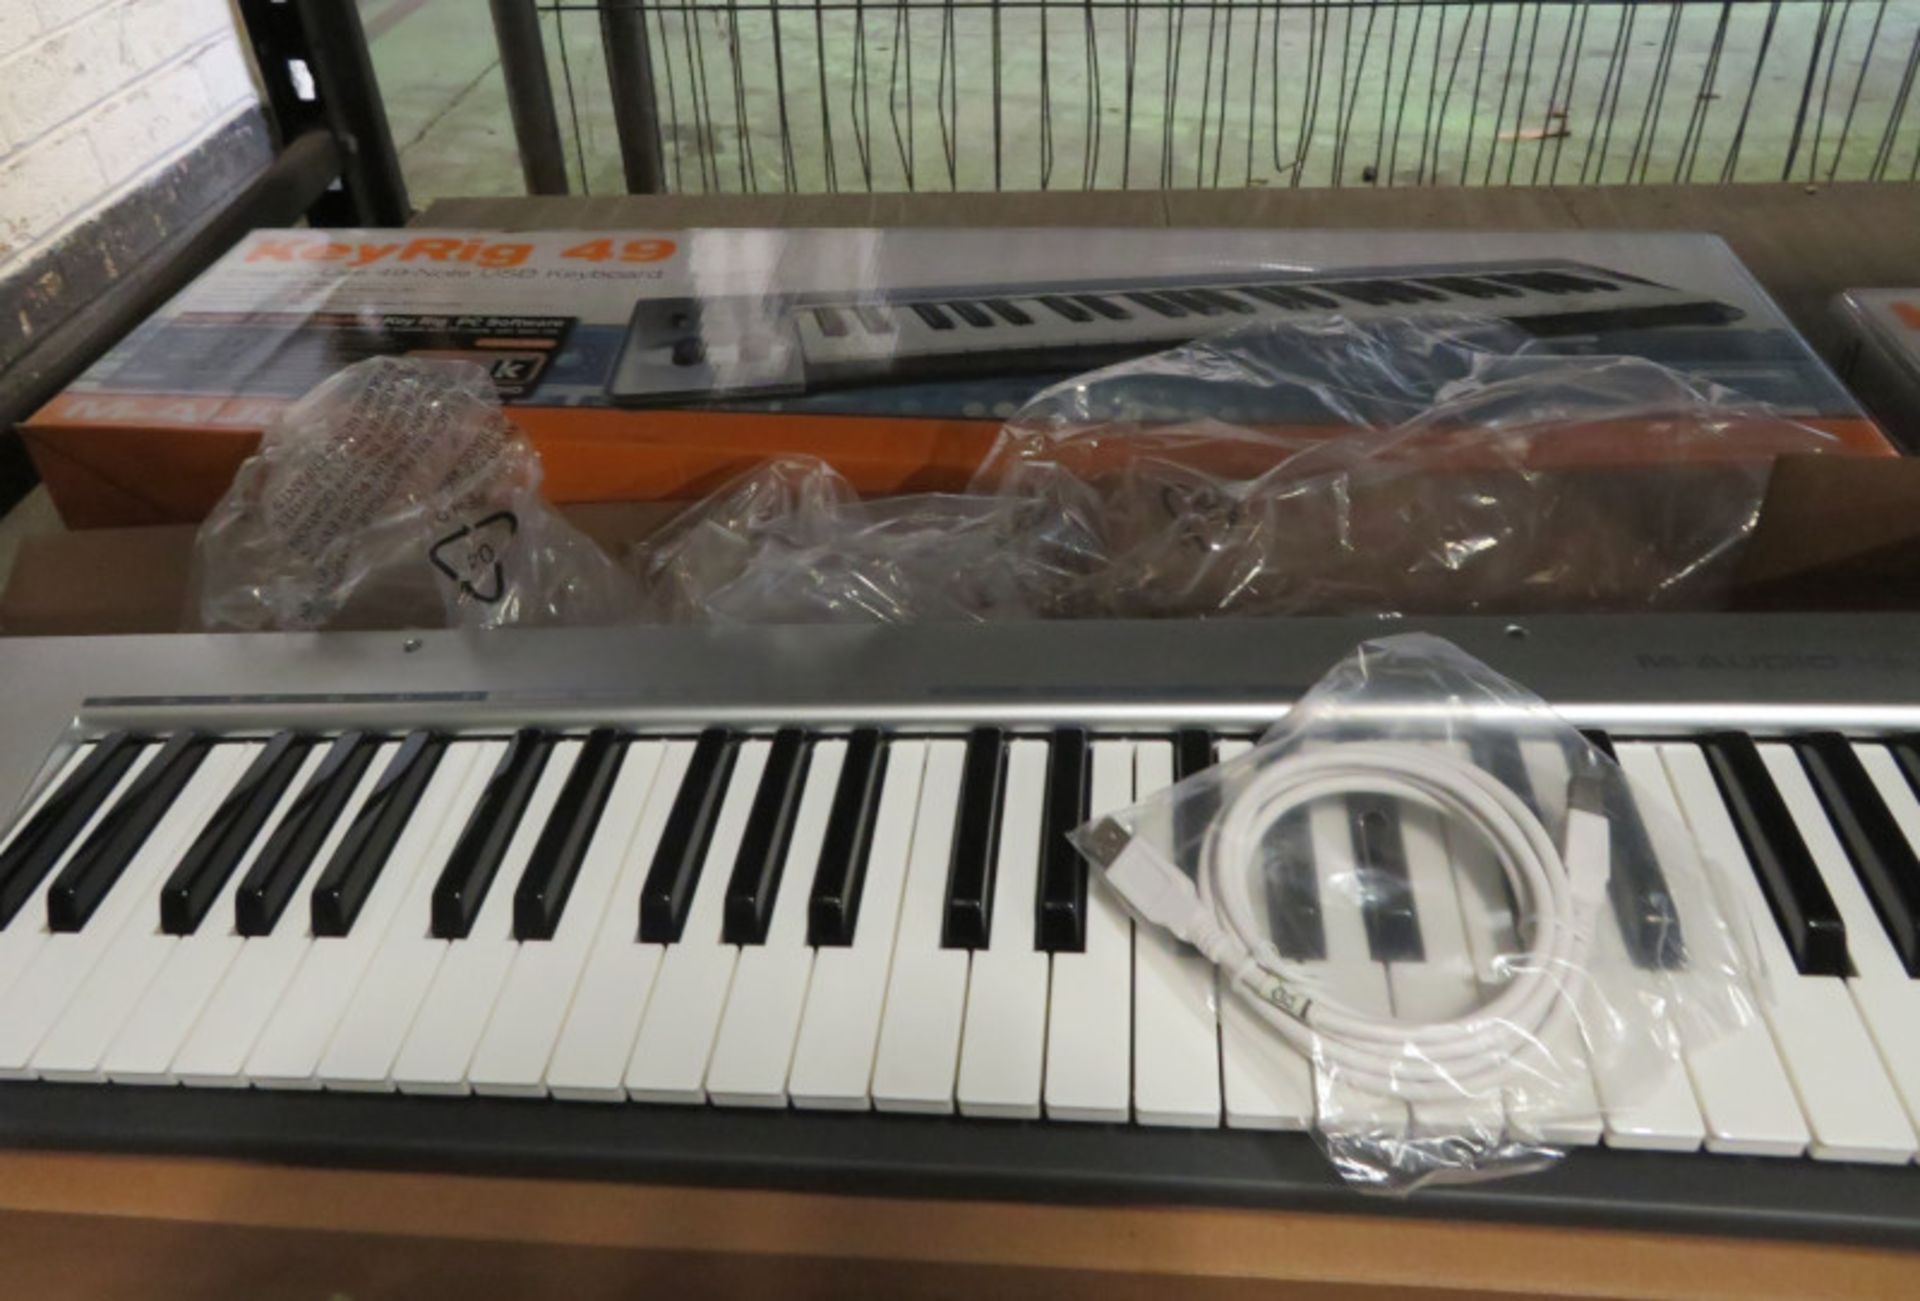 2x M-Audio KeyRig 49 Note Synth-Action USB Keyboards - Image 4 of 4